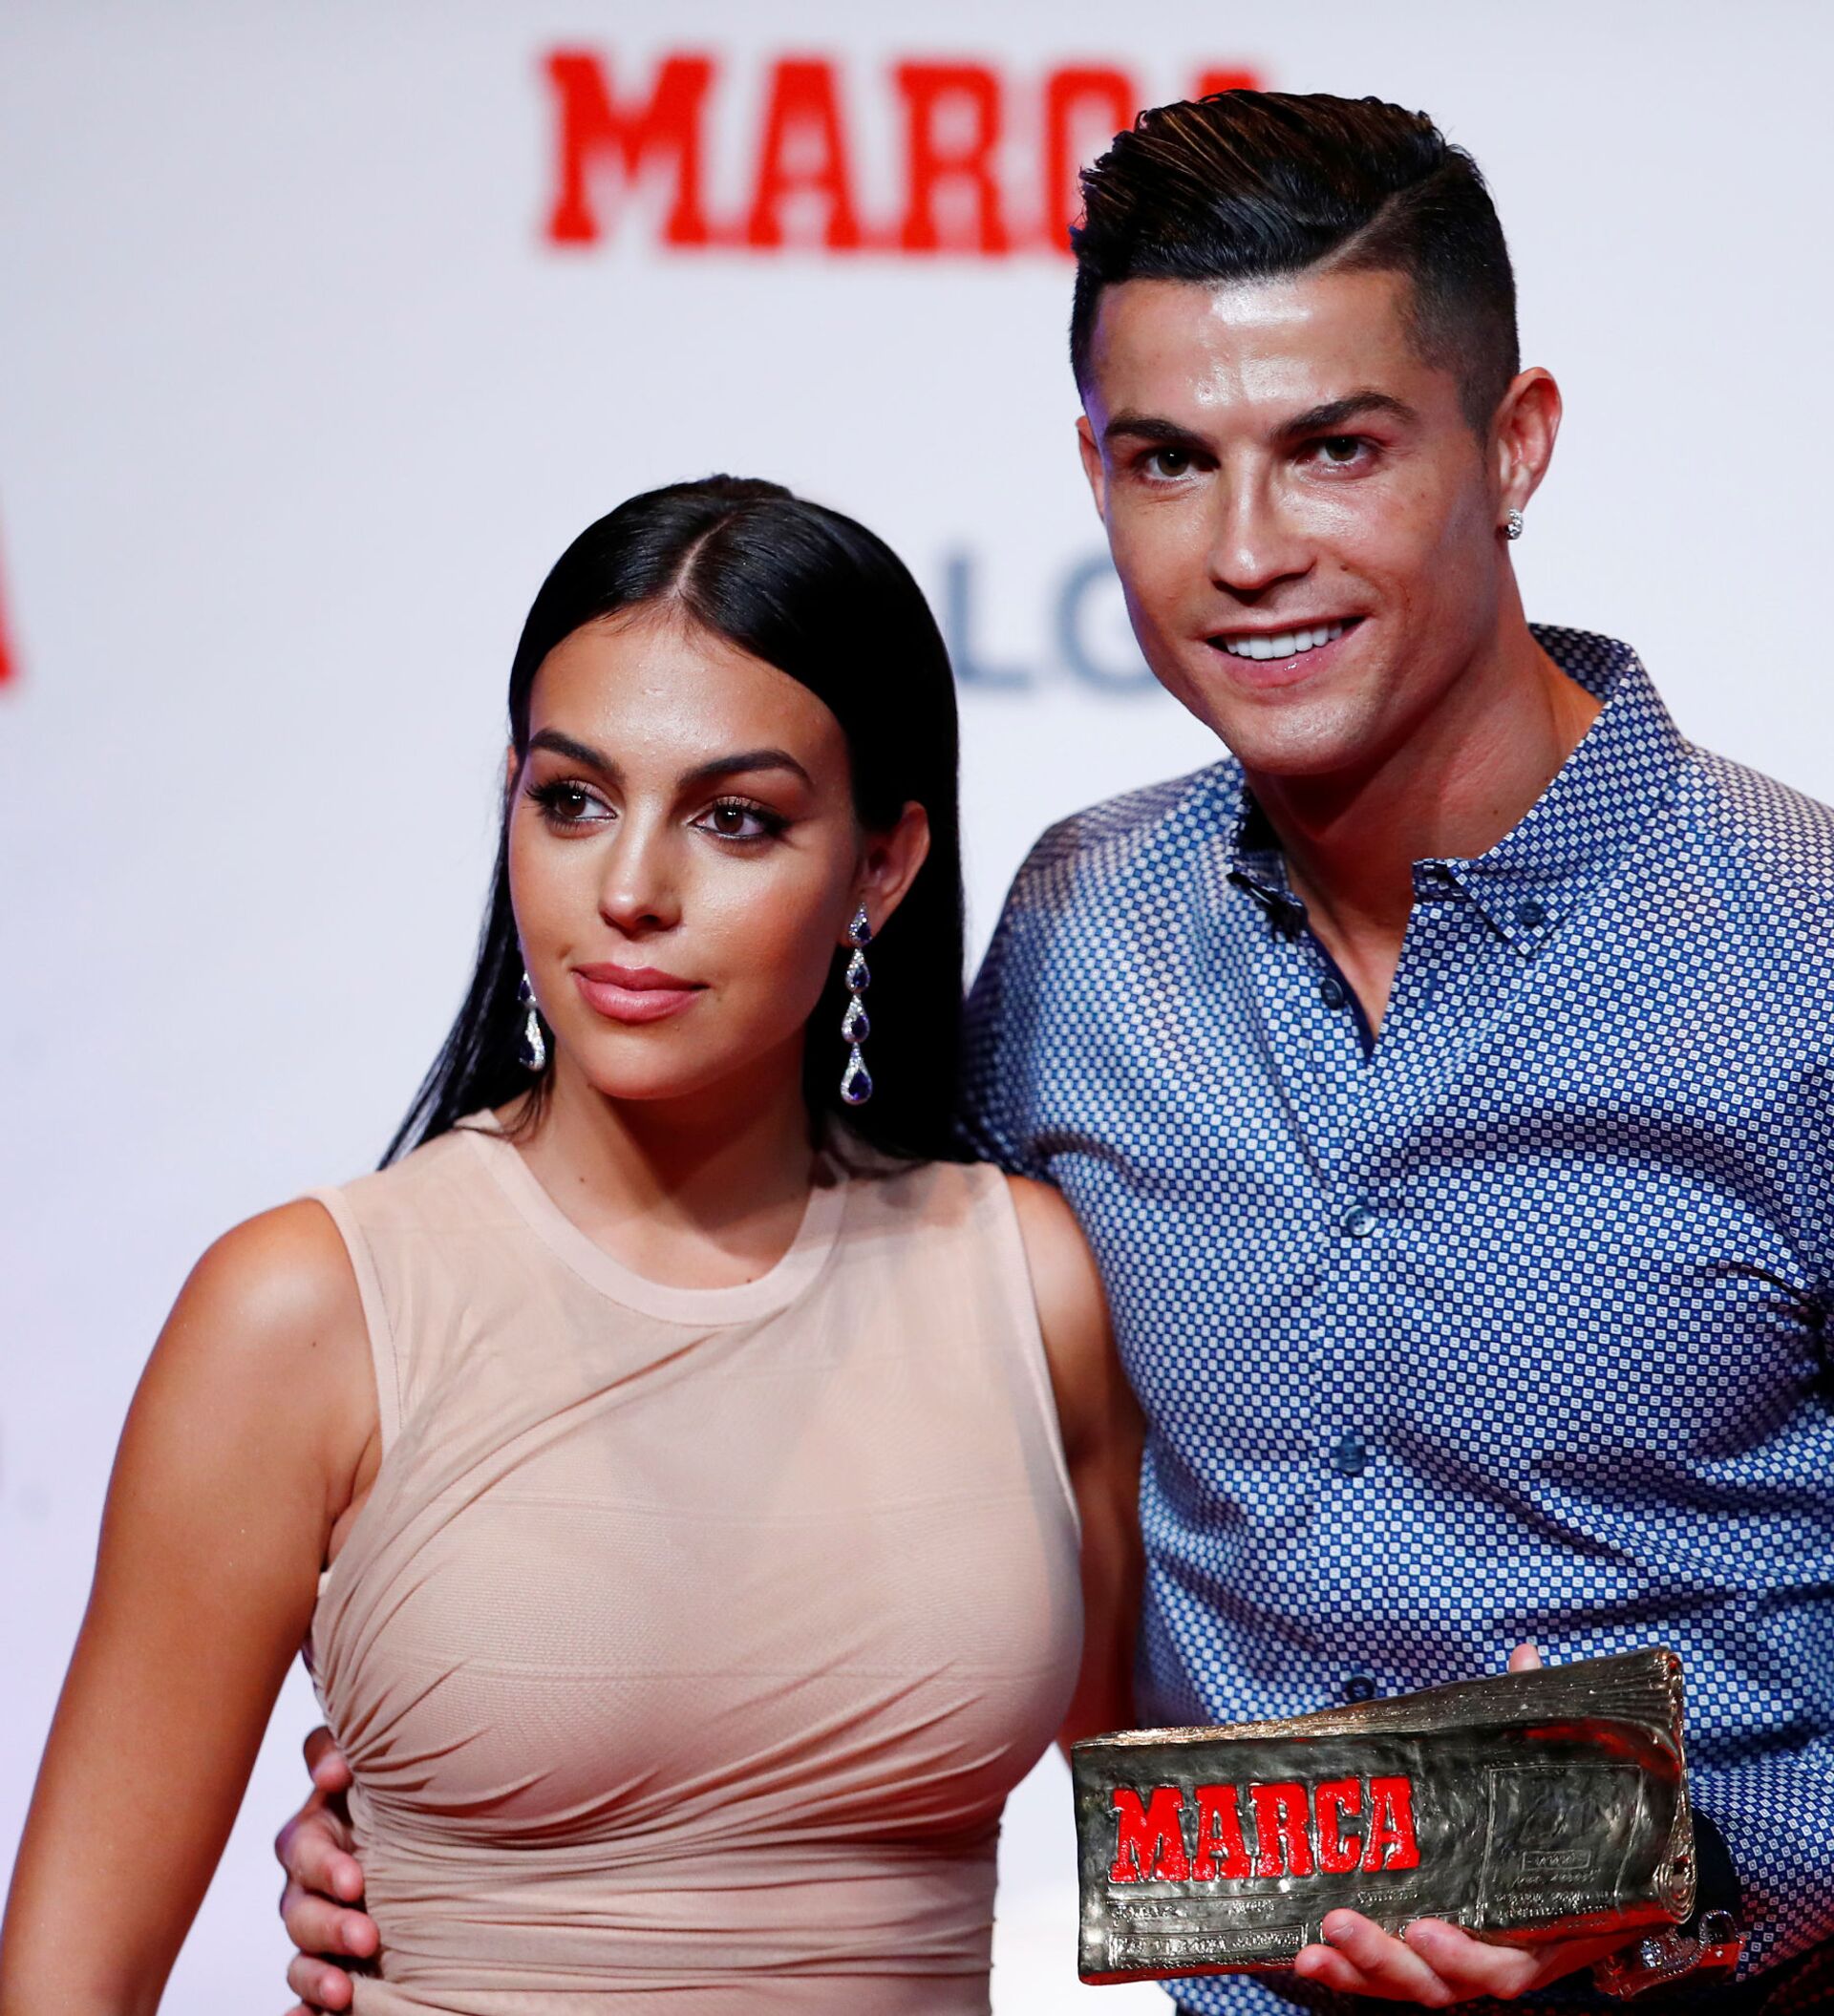 Cristiano Ronaldos Girlfriend Georgina Rodriguez Shares Intimate Details of Life With Football Icon